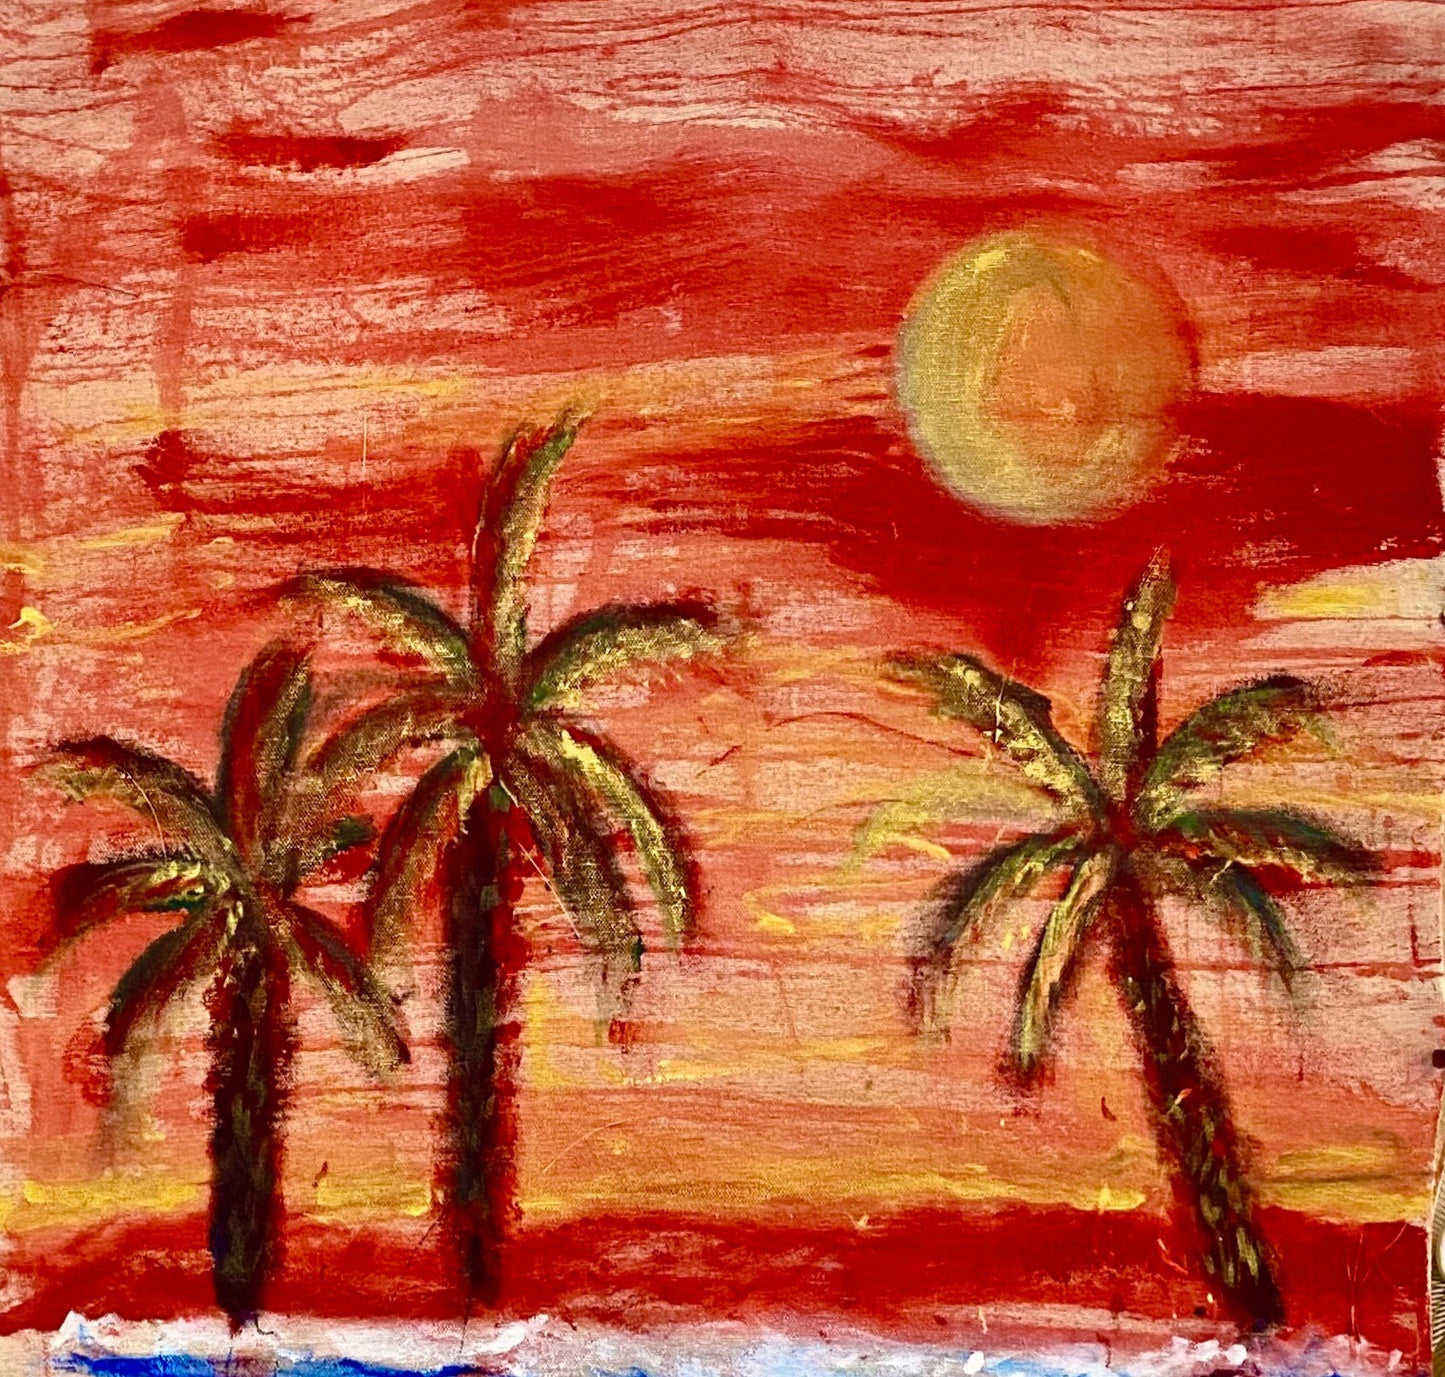 Another Sunset Painting-sonarta.com Each day as we approach the sunset, with lights intensifying and changing their values, skies become amazing palettes of colors created by heavens above.This Acrylic on Canxas painting is created by artist, Shahla Rahimi Reynolds. Another Sunset Painting-sonarta.com